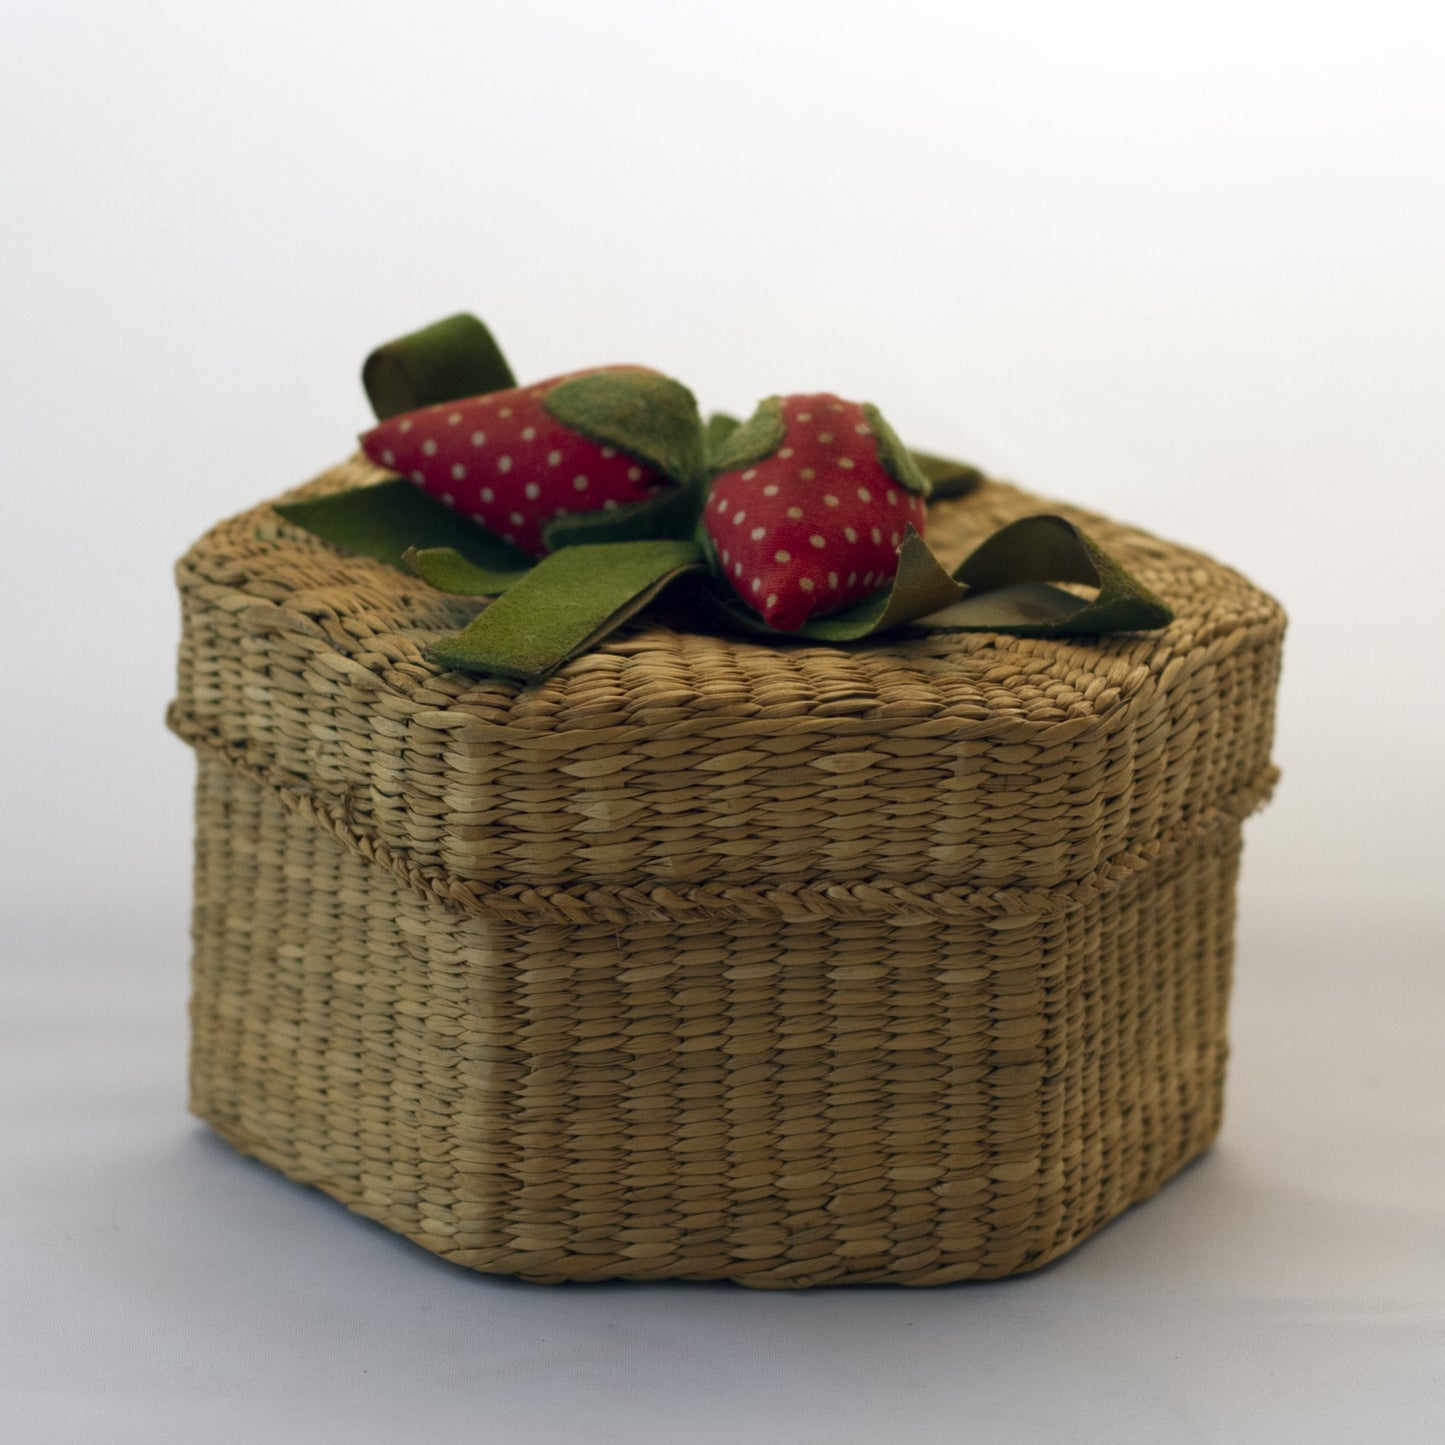 WOVEN WICKER HEXAGON BASKET with Fabric Strawberries Decorated Lid